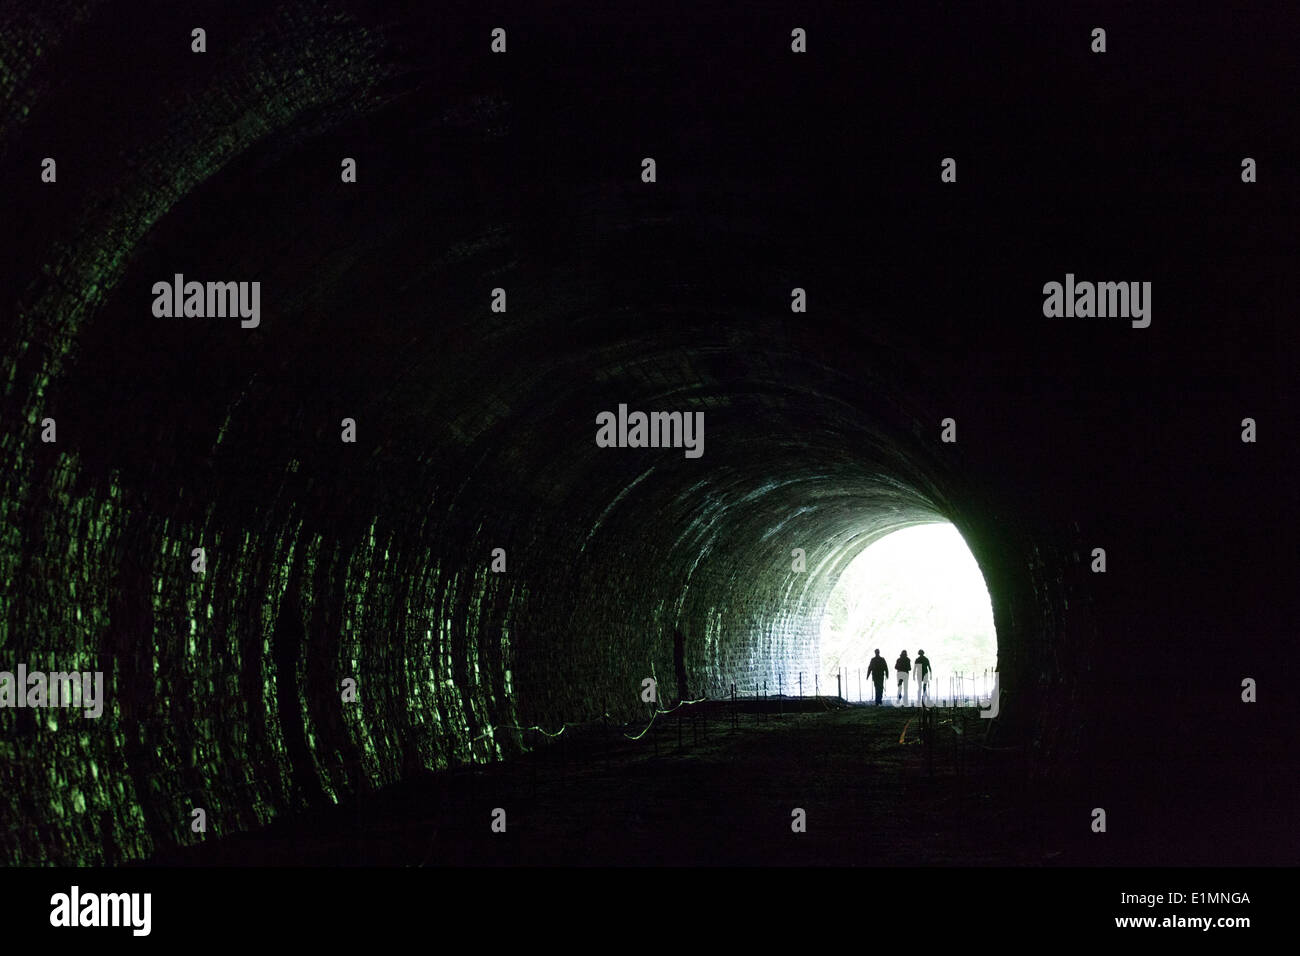 Three women walking out of a dark and gloomy tunnel into the light in Belgium Stock Photo